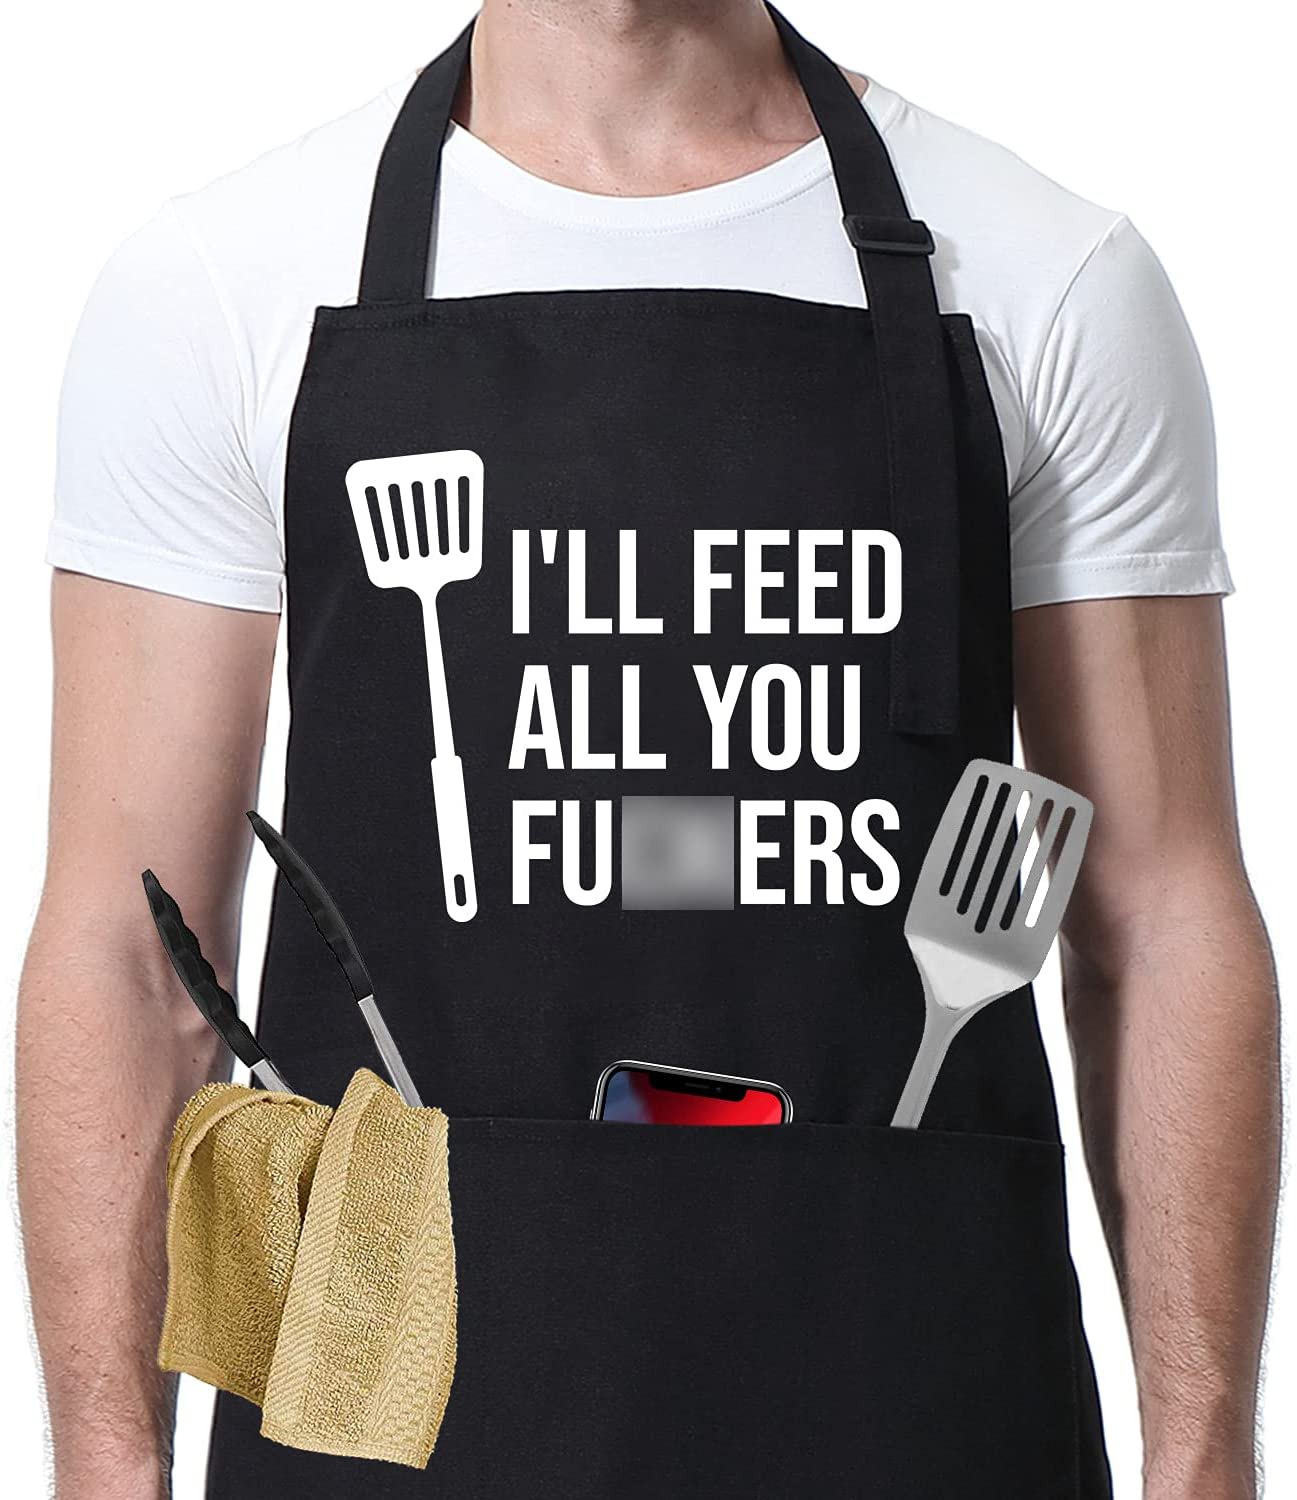 I'll Feed All You - Funny Aprons for Men, Women with 3 Pockets - Dad Gifts, Gifts for Men - Christmas, Thanksgiving, Birthday Gifts for Husband, Dad, Wife, Mom - Miracu Cooking Grilling BBQ Chef Apron